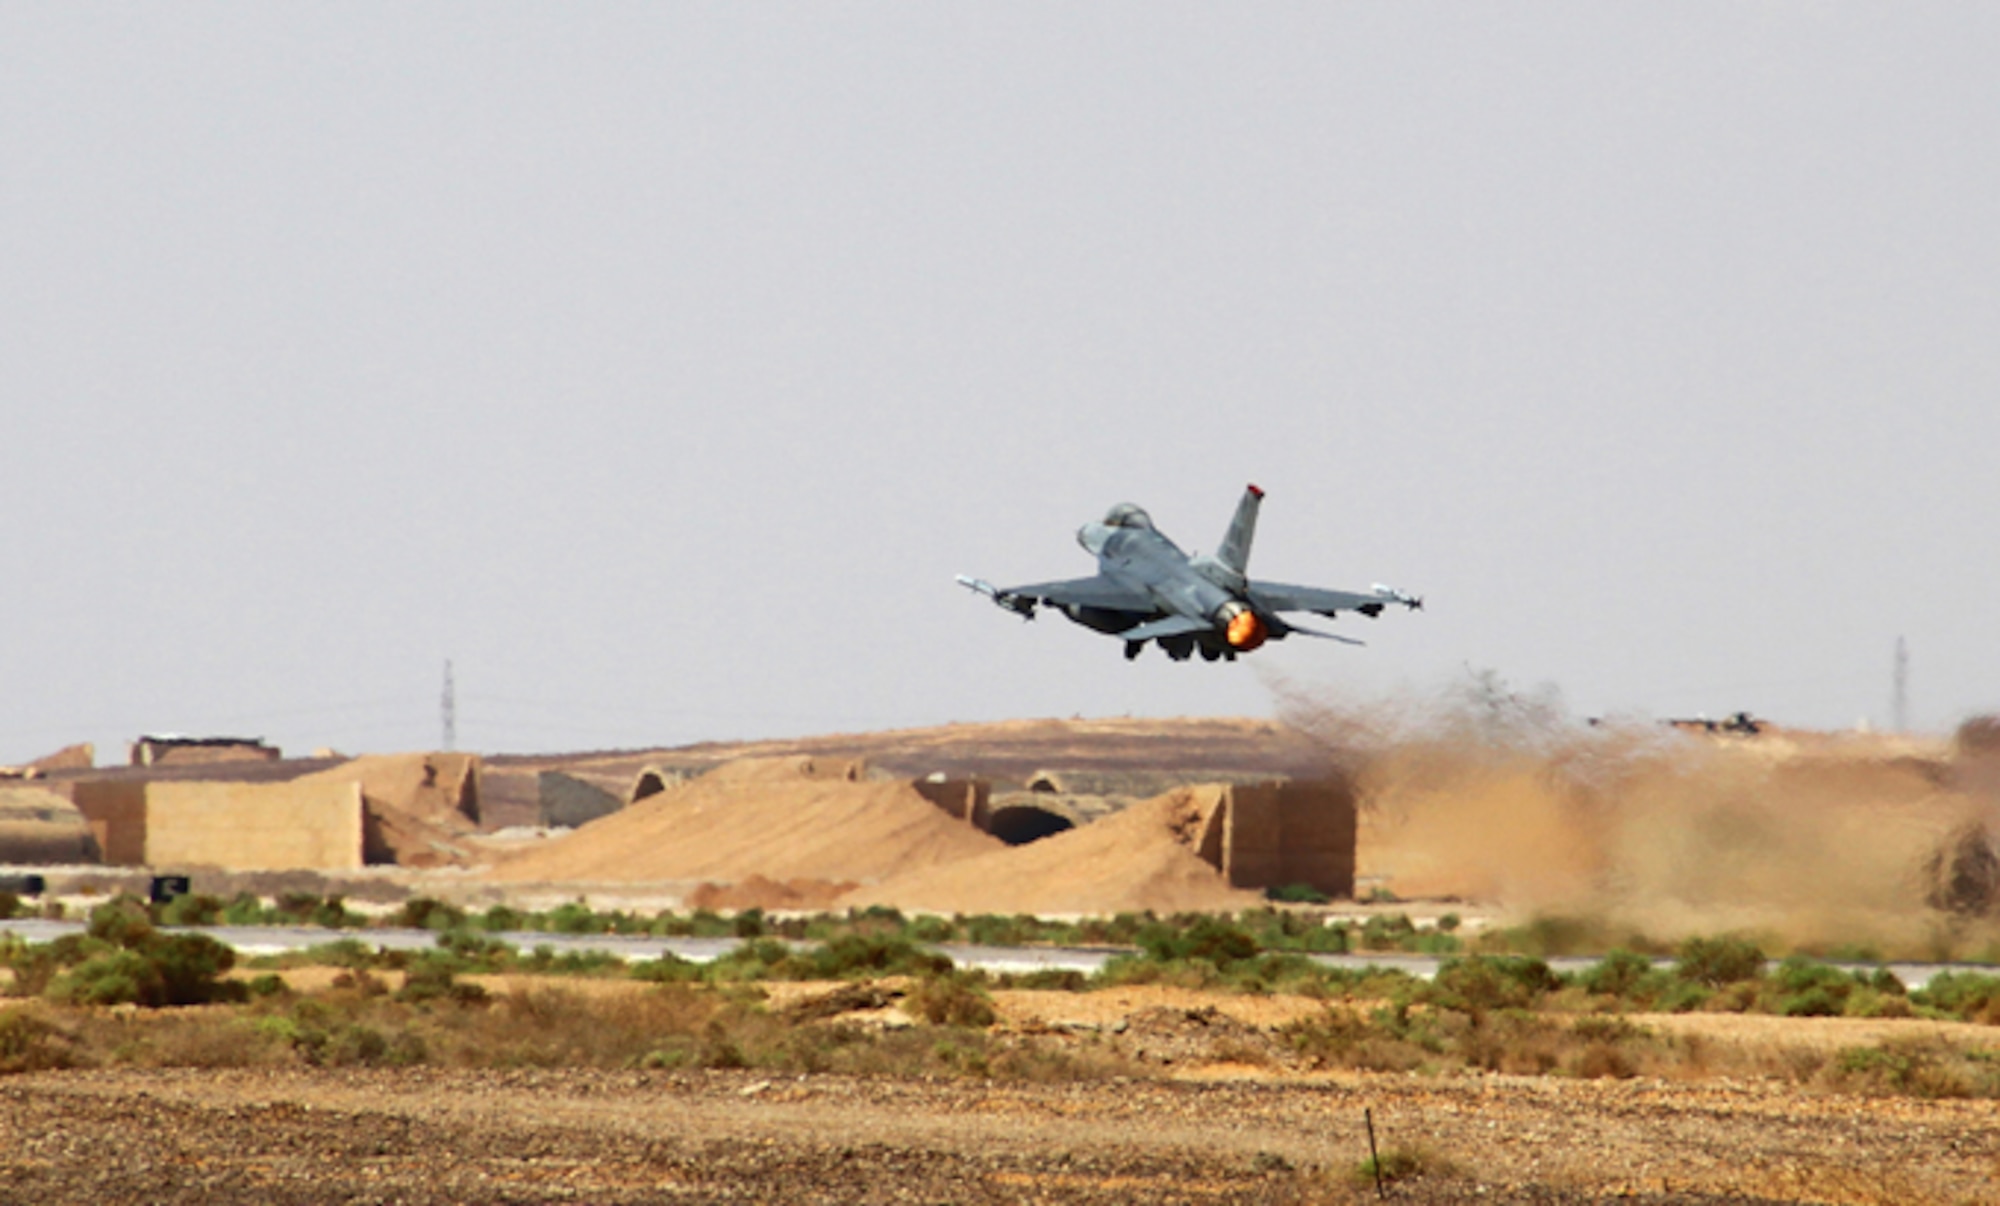 An F-16 Fighting Falcon from the 13th Fighter Squadron at Misawa Air Base, Japan, takes off during Exercise Eager Tiger May 11, 2014, at an air base in northern Jordan. This multi-national exercise allows fighter pilots to collaborate and practice their tactics and techniques. (U.S. Air Force photo/Staff Sgt. Tyler McLain)